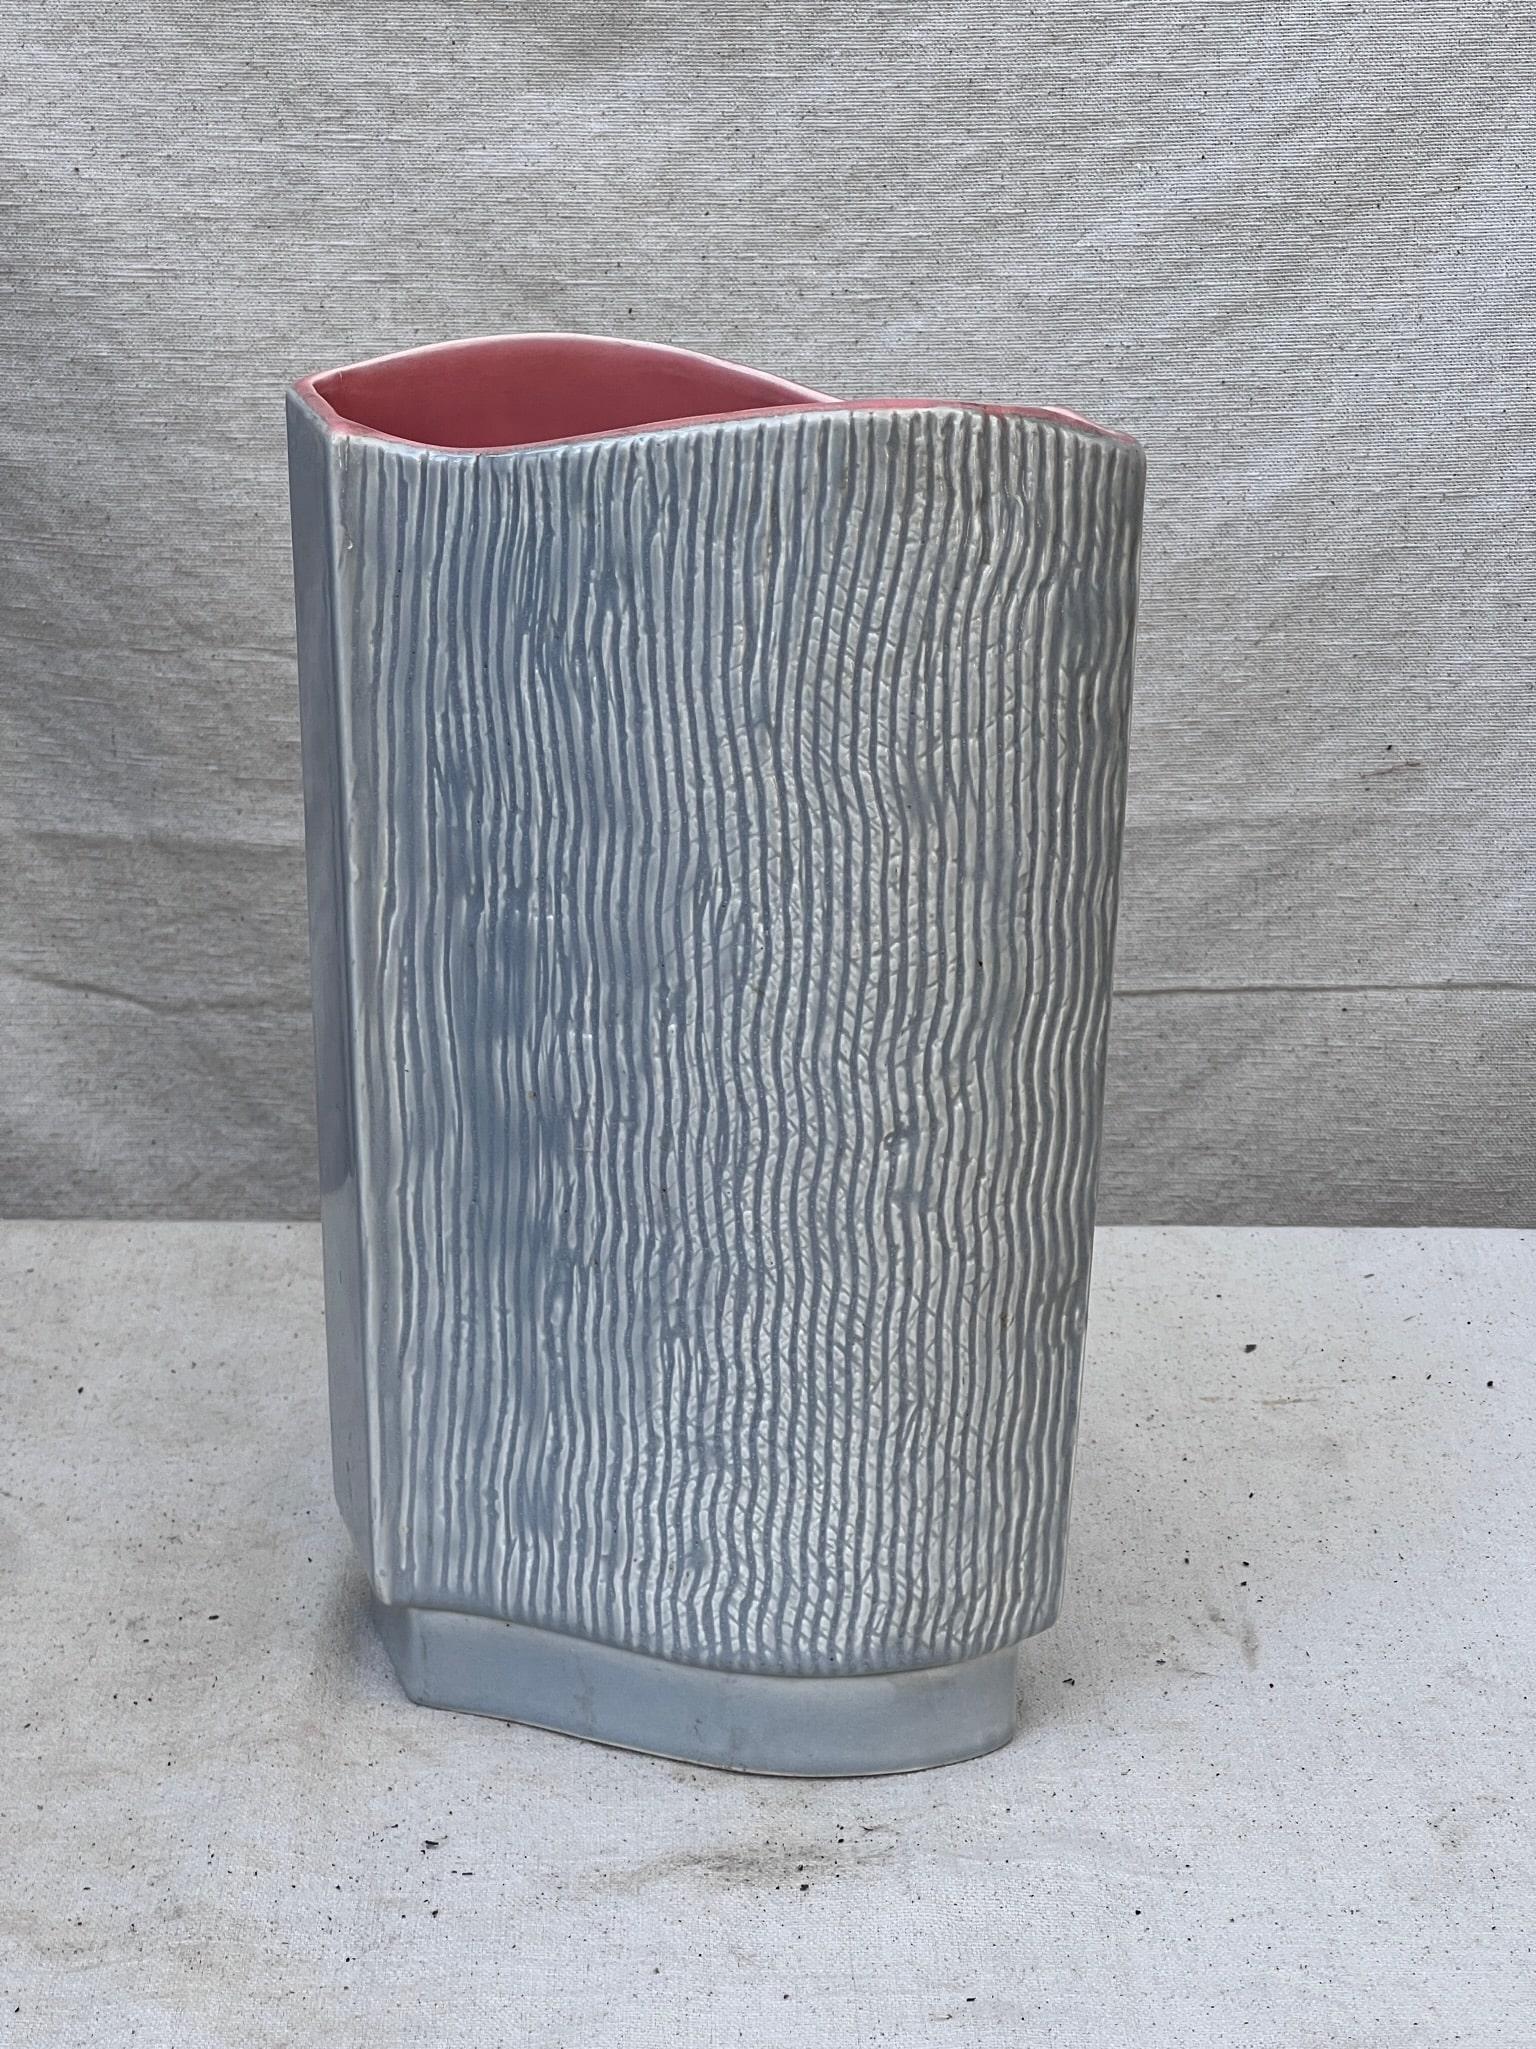 Hand-Crafted Mid-Century Modern Redwing Porcelain Vase For Sale